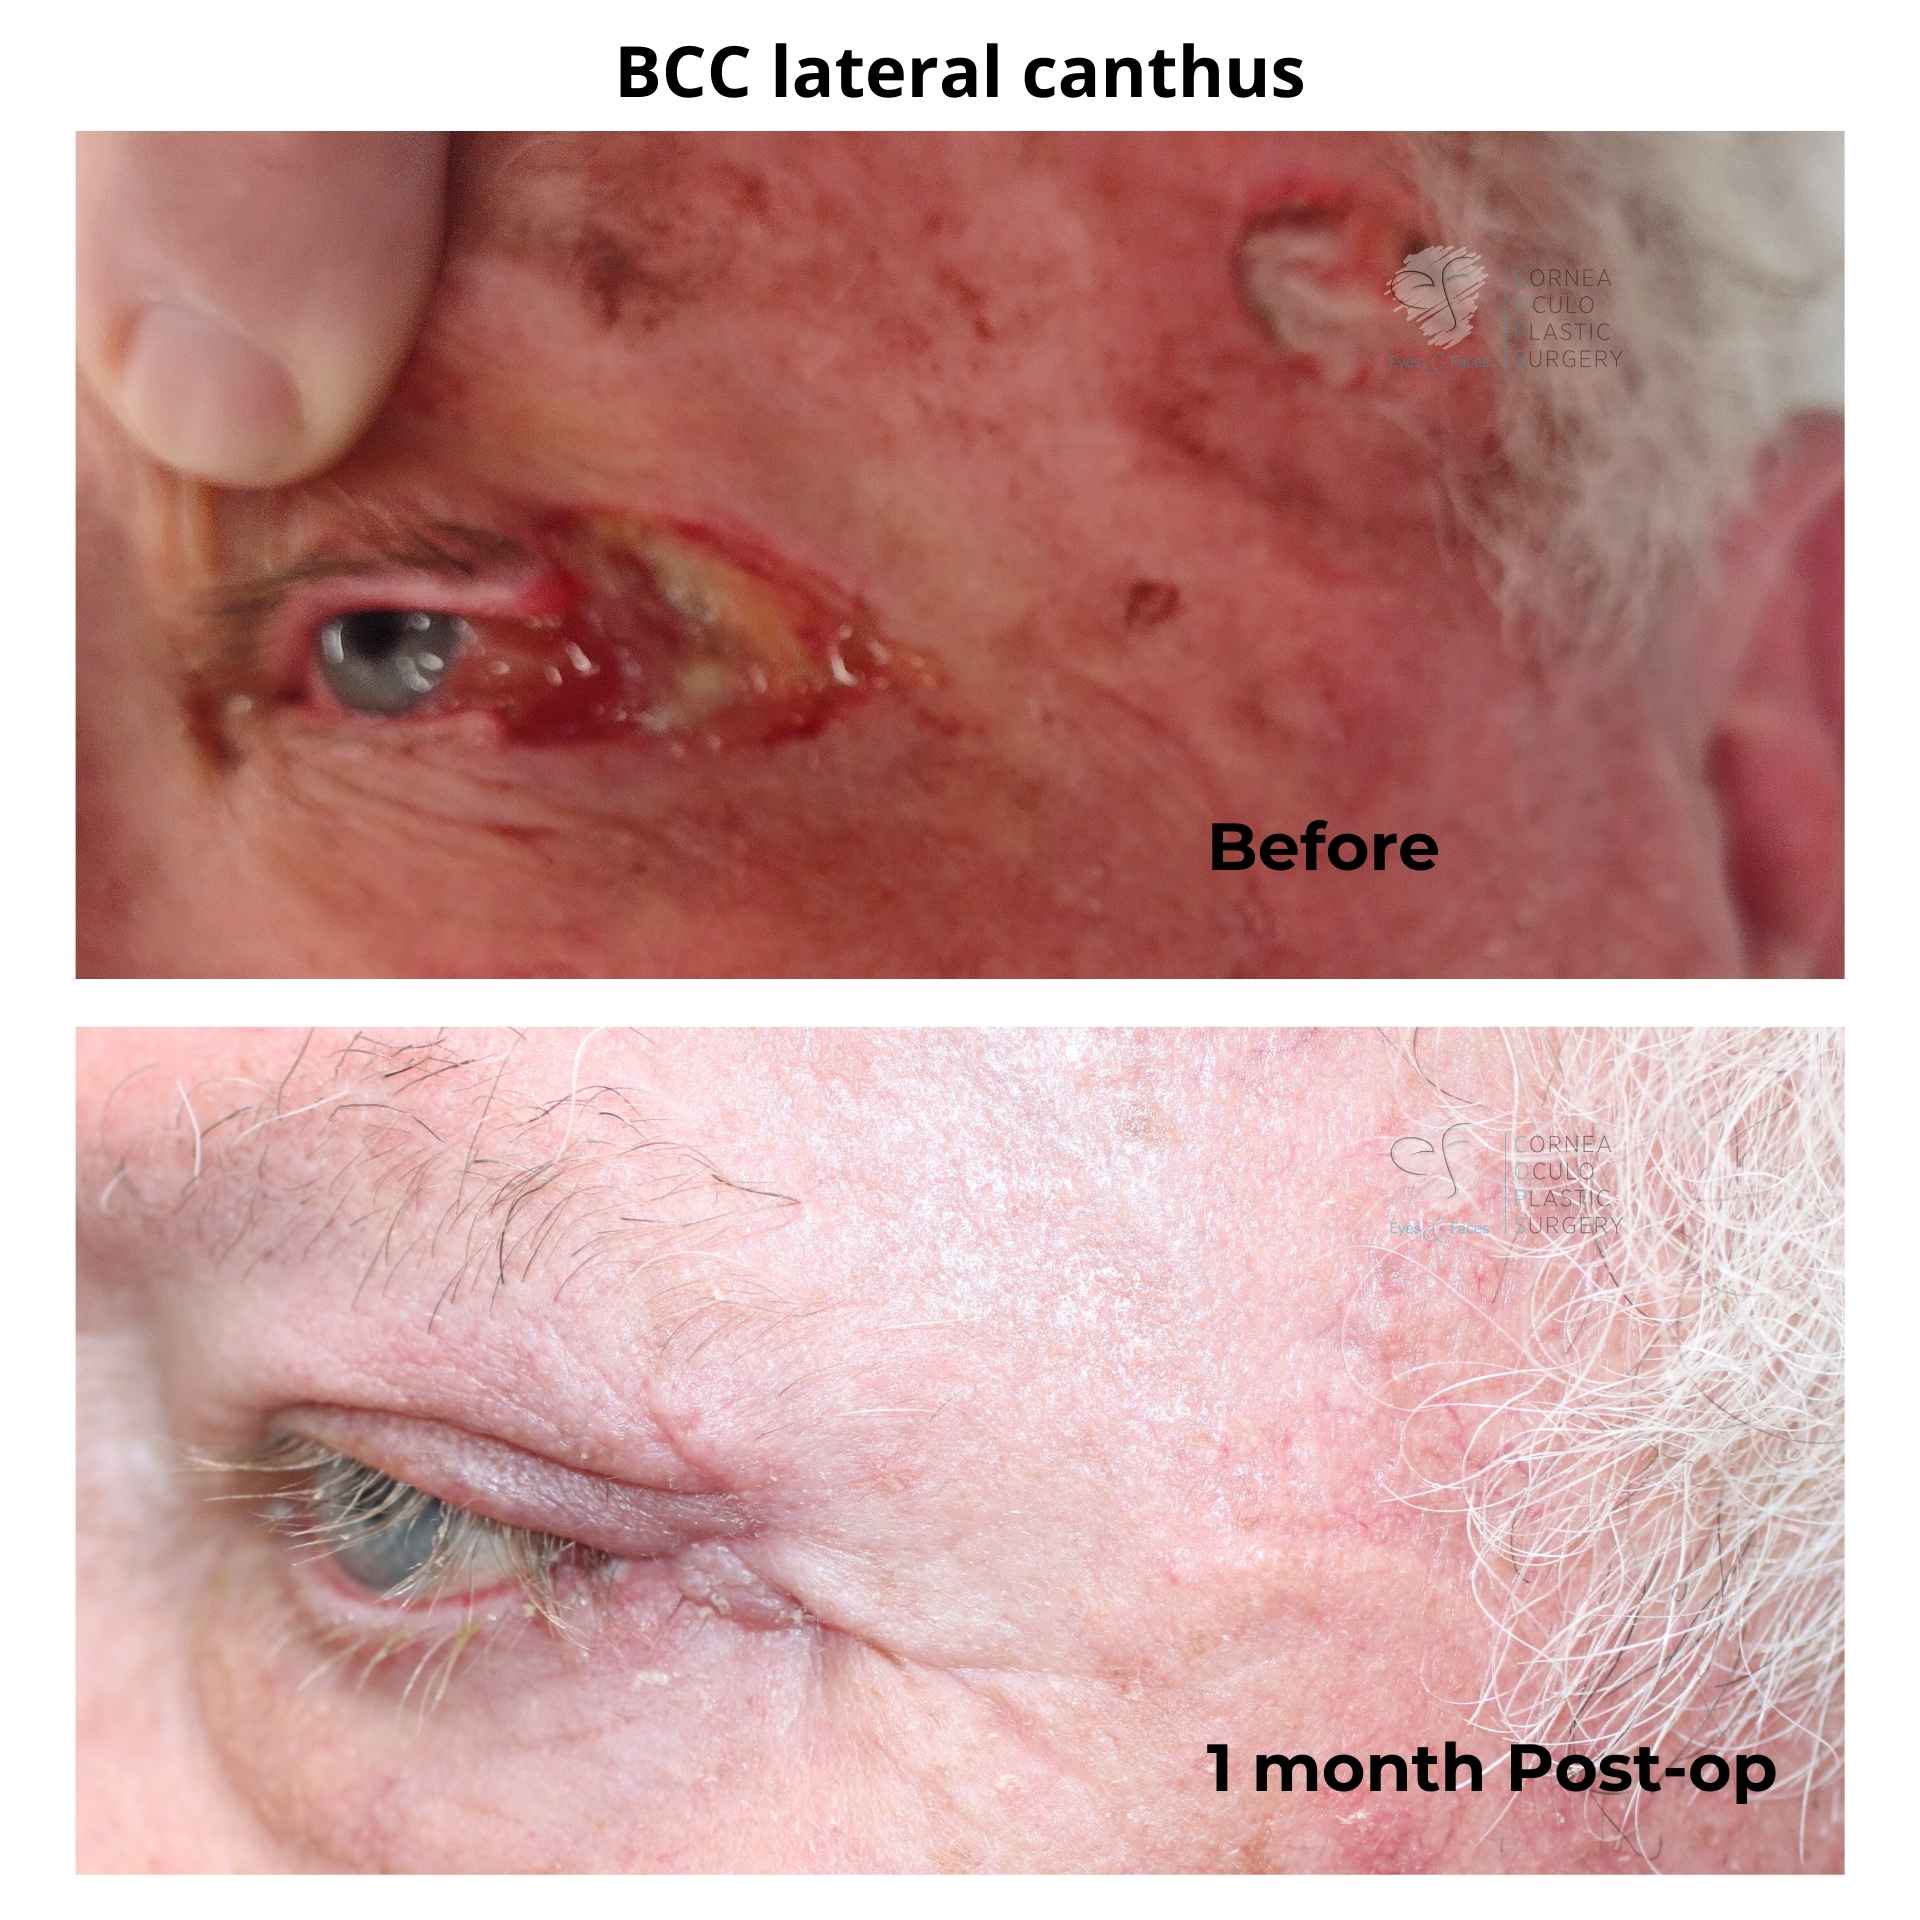 Nasty cancer of the eye. Second image shows 1 month after Dr Anthony Maloof performed a Mohs reconstruction.